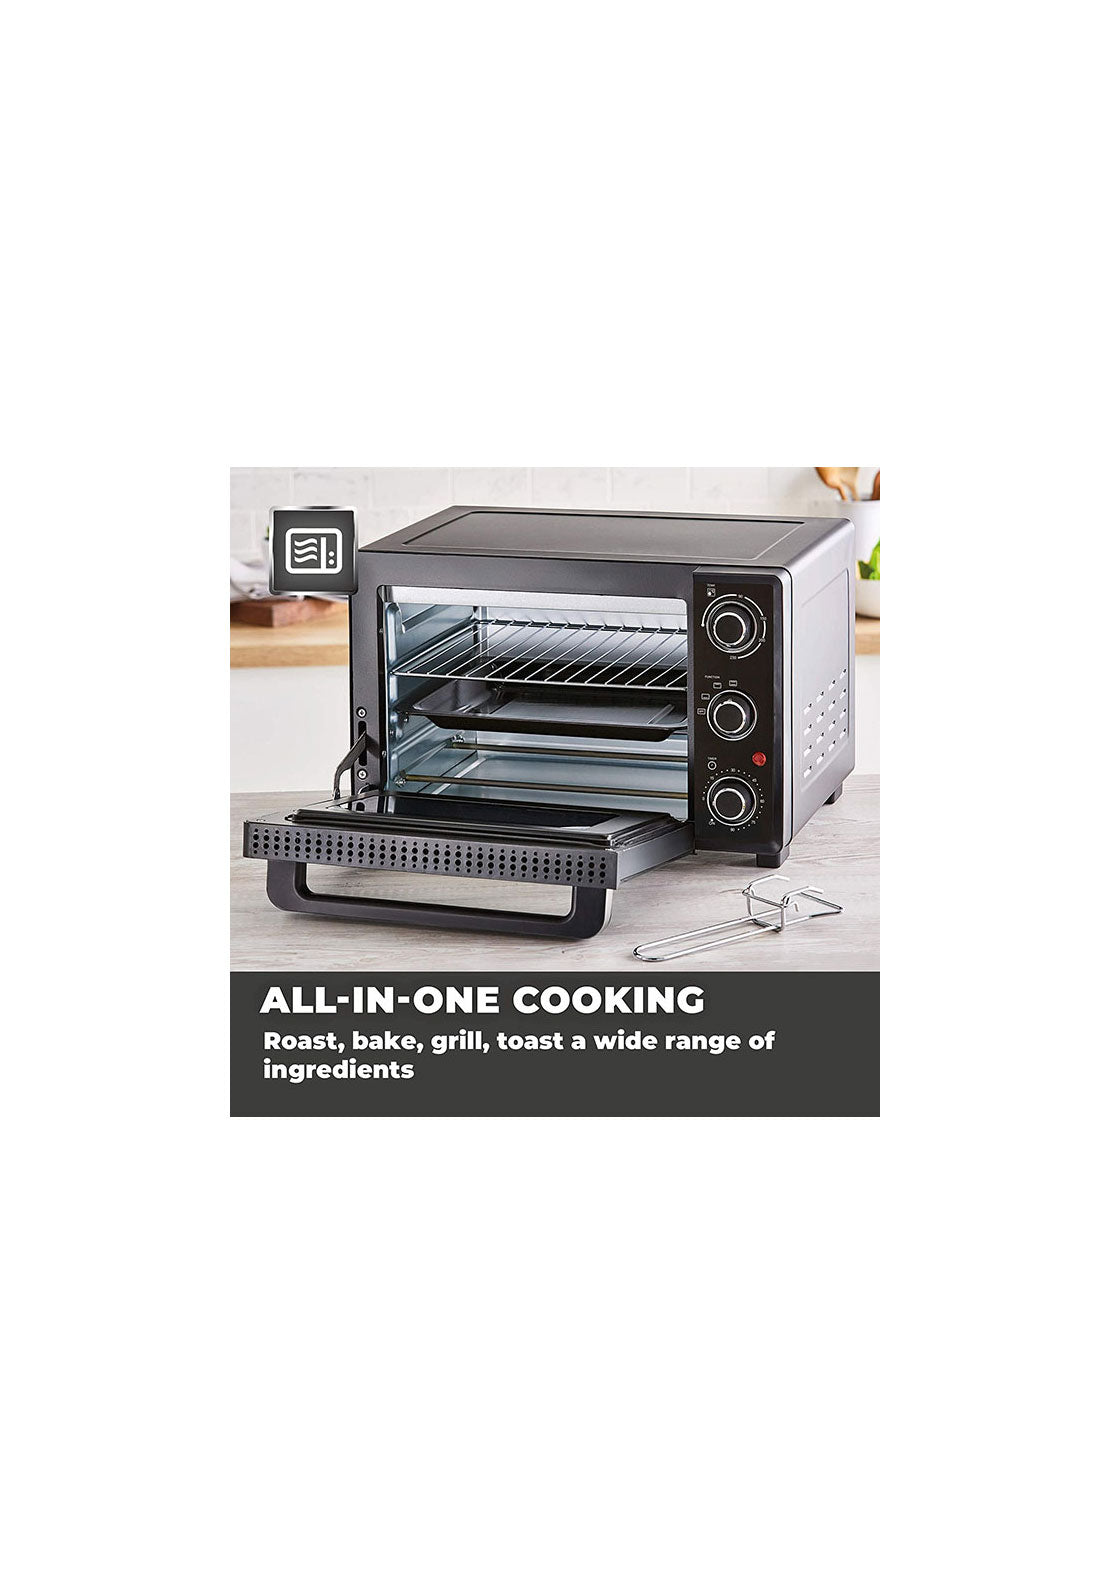 Tower 23L Mini Oven With Hot Plates | T14043 5 Shaws Department Stores